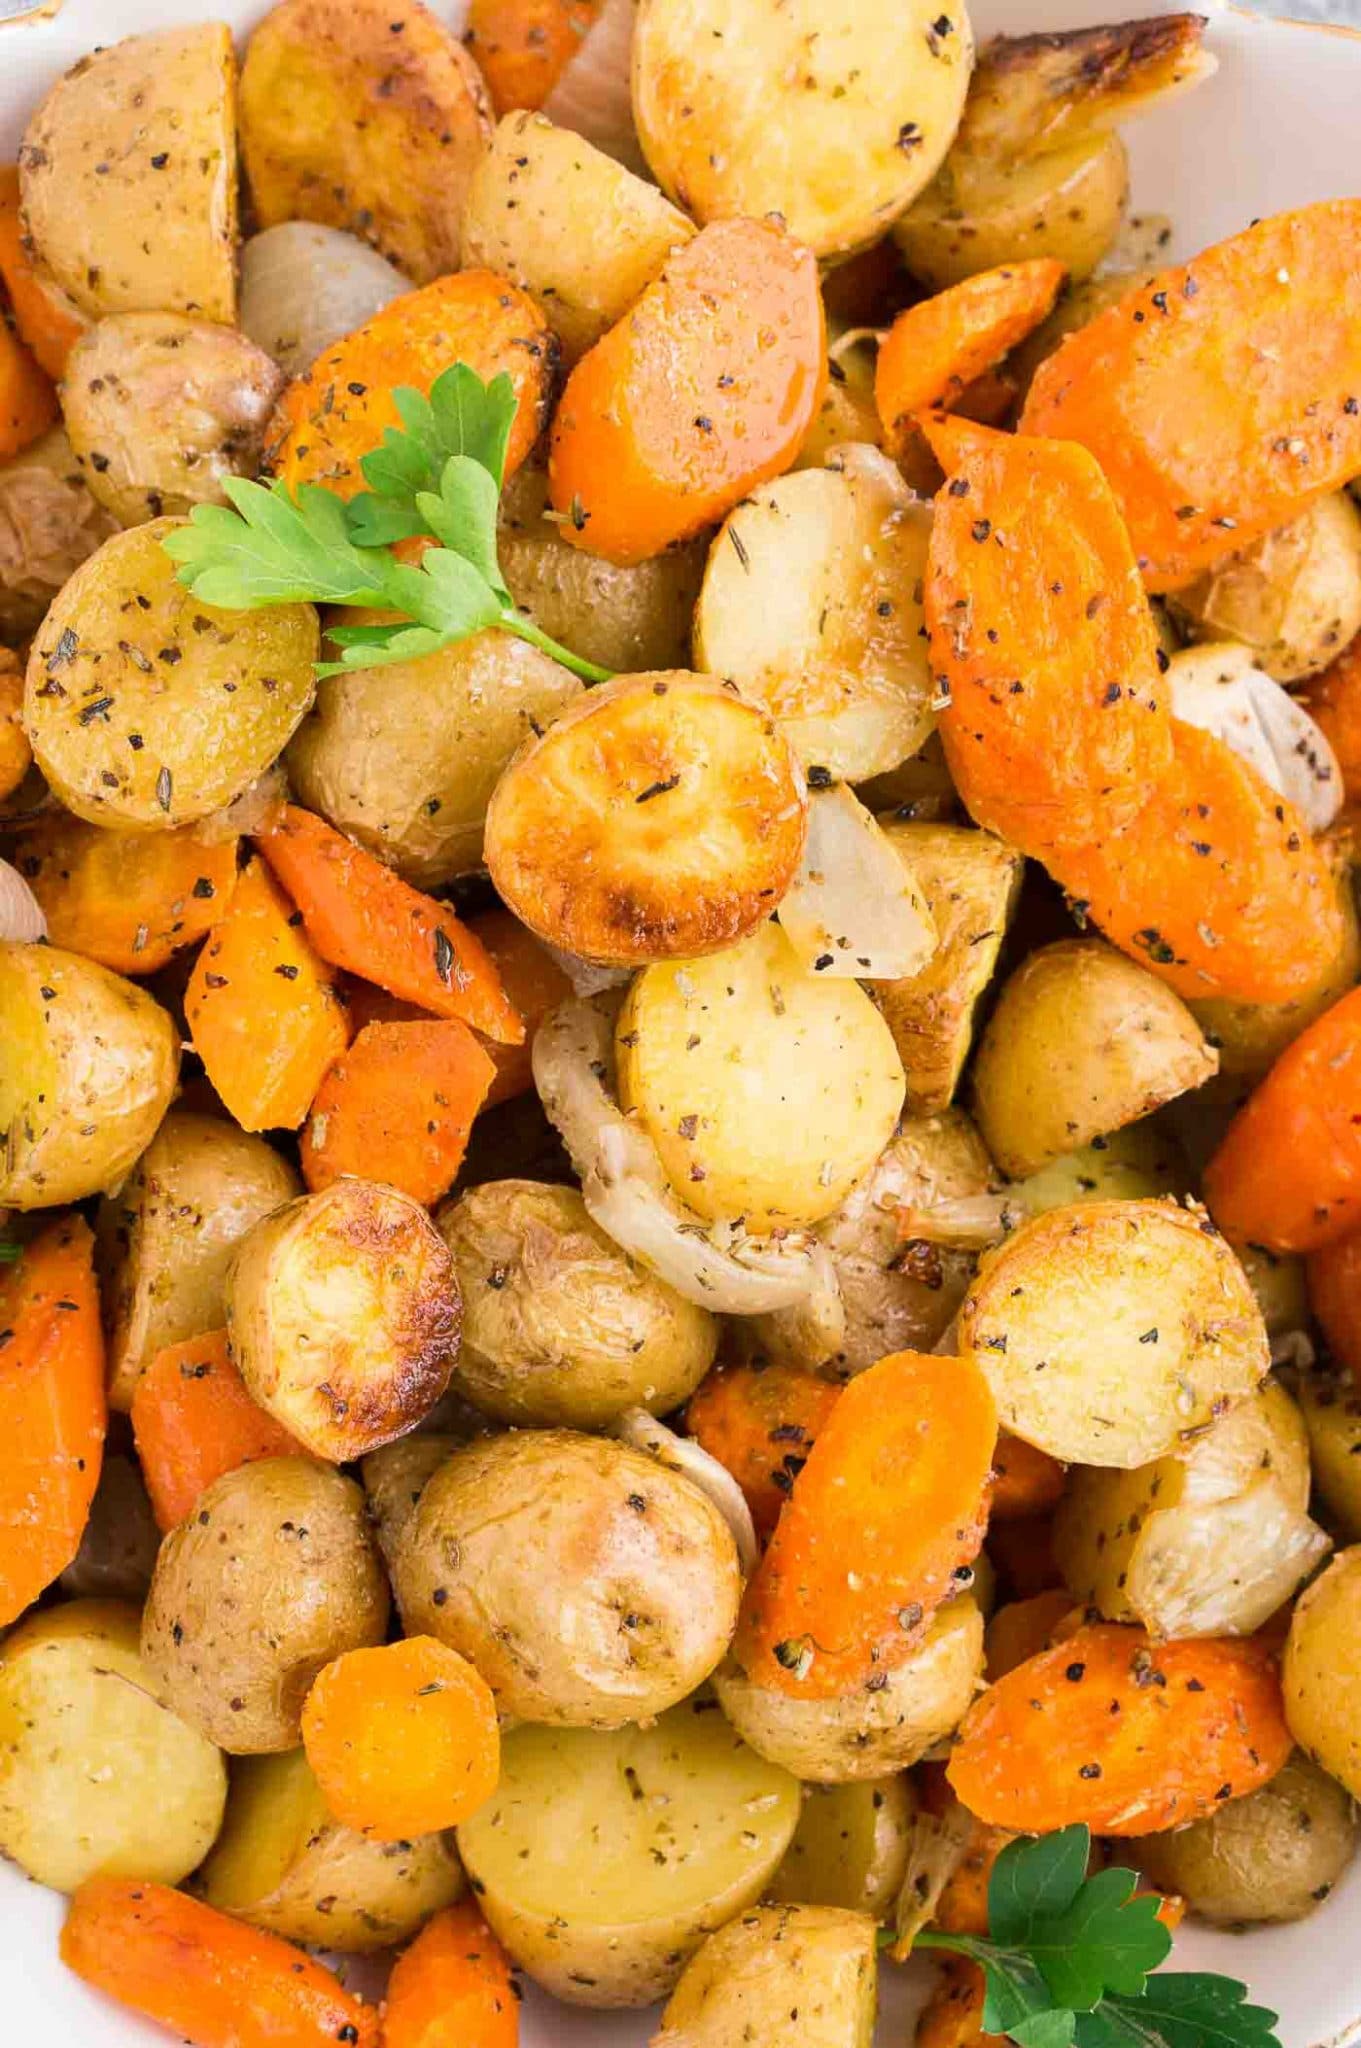 close up image of baked potatoes and carrots and onions